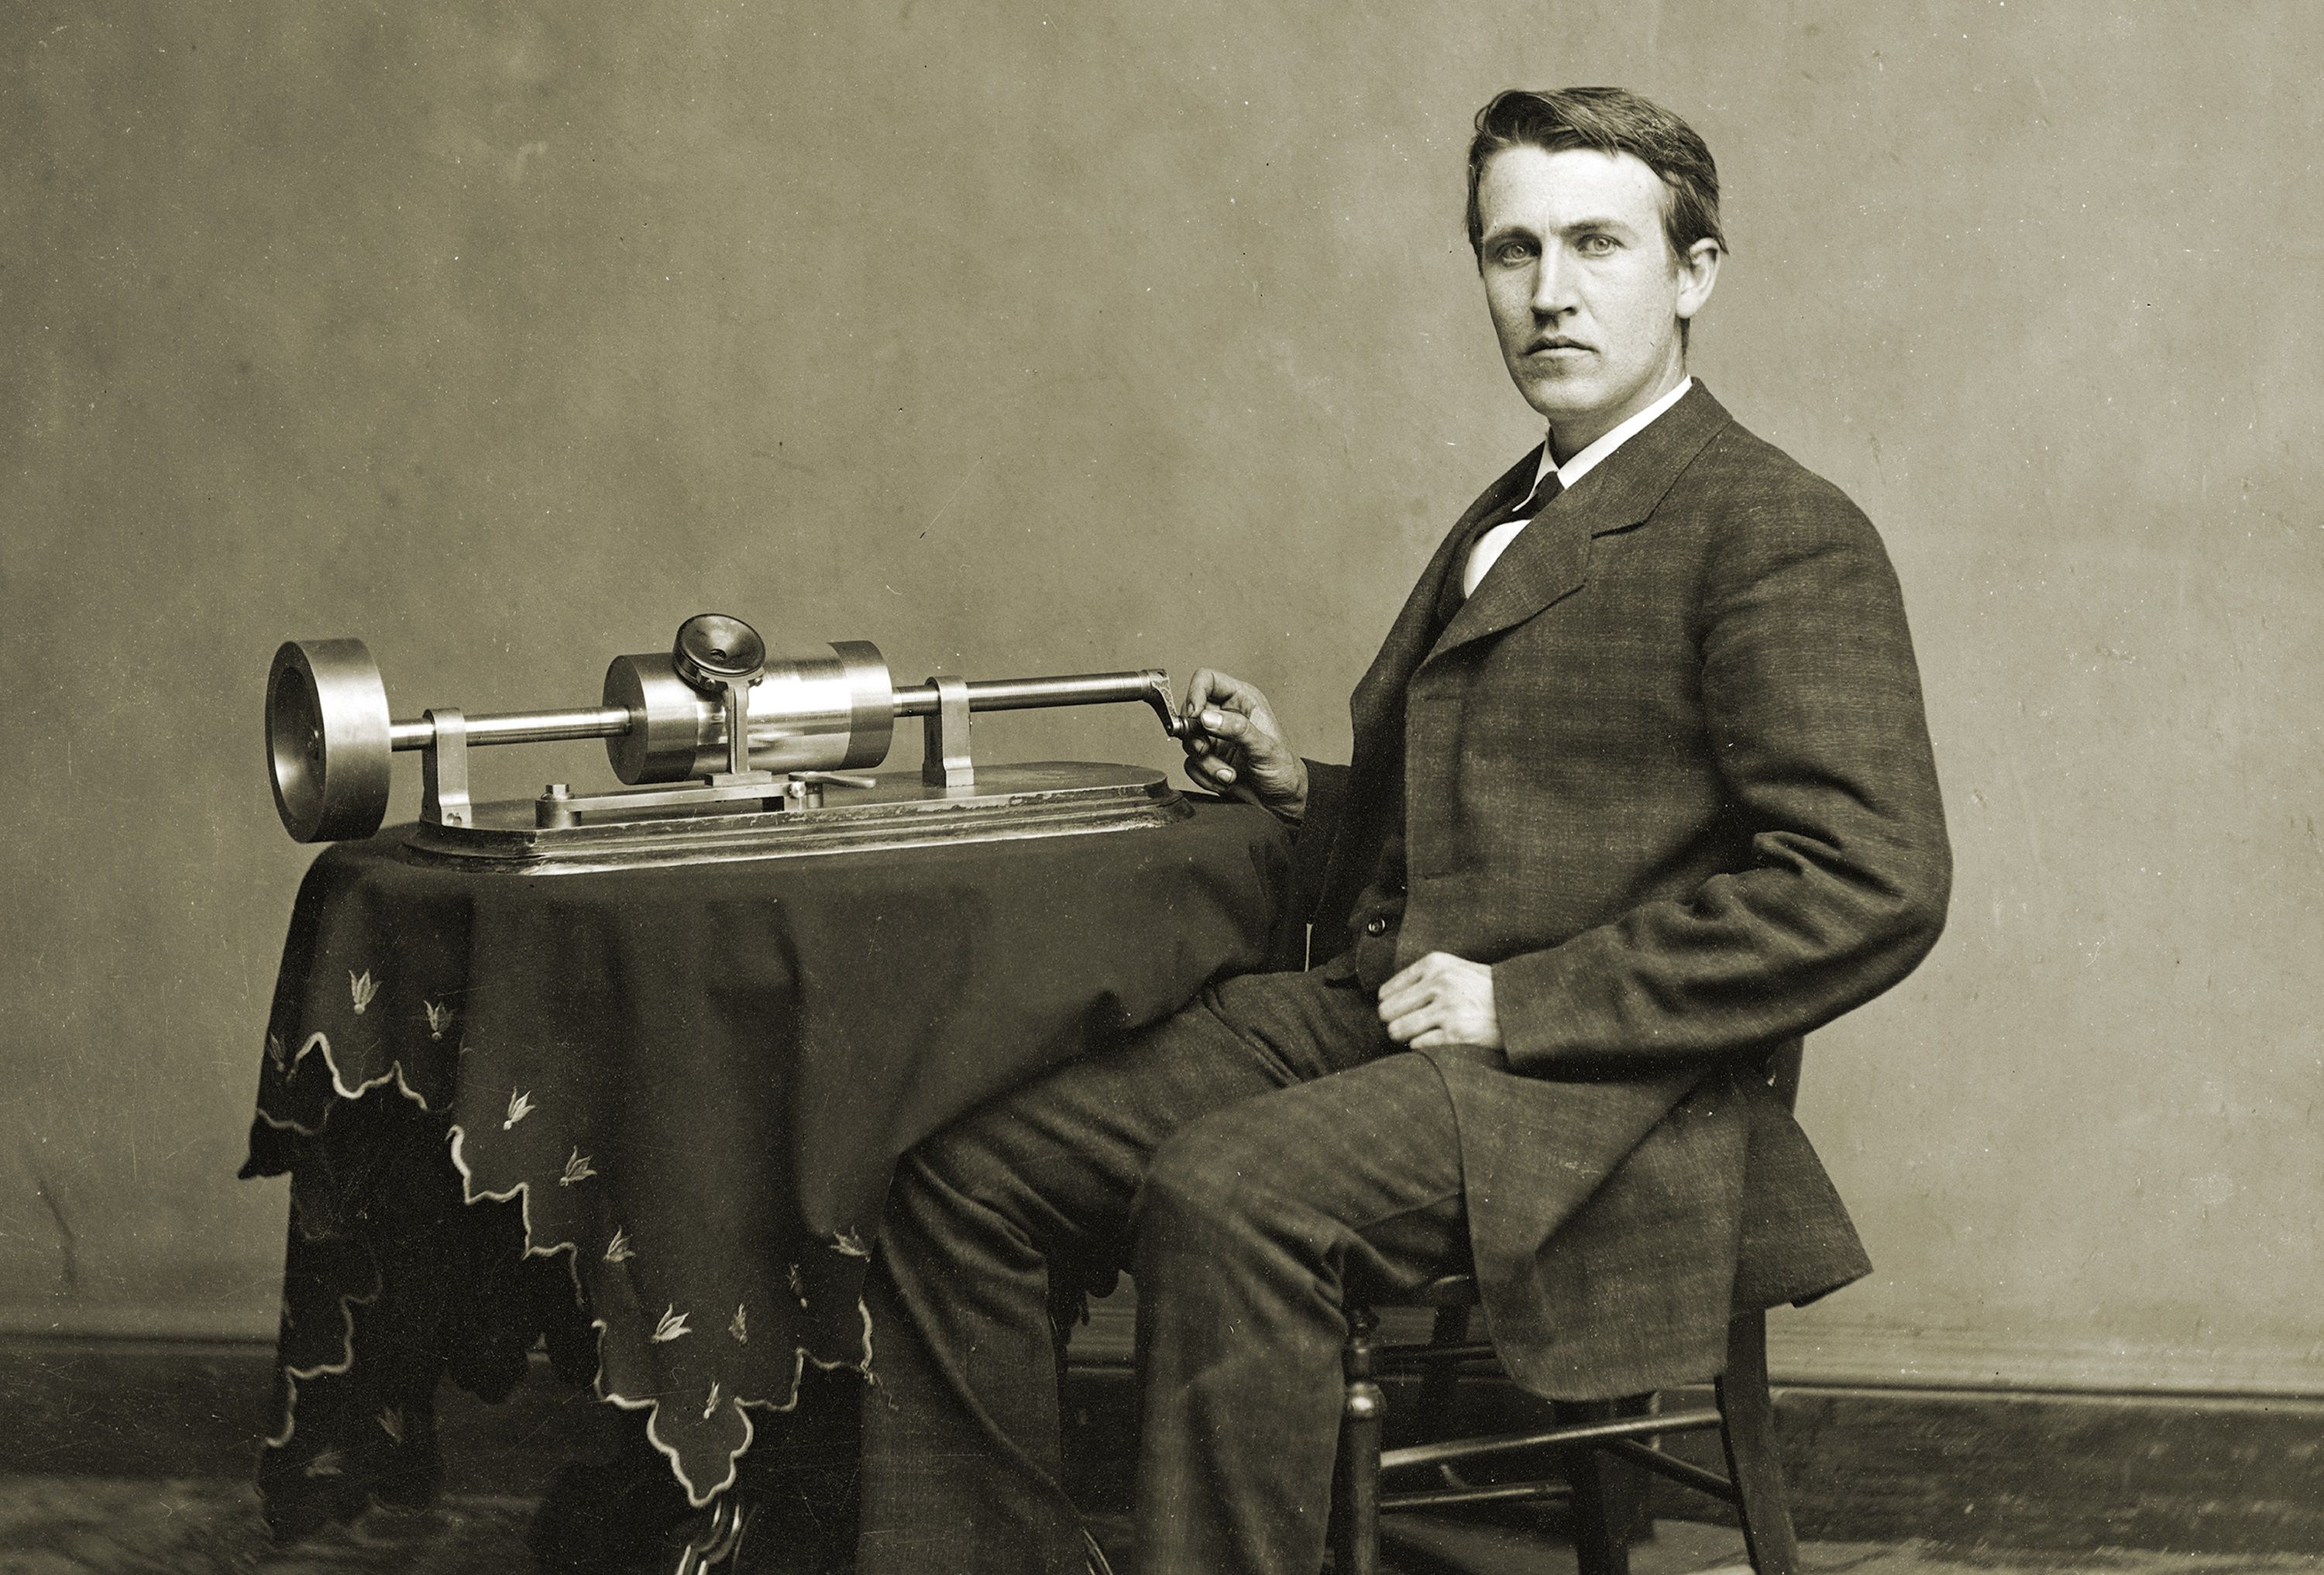 edison-s-invention-of-the-phonograph